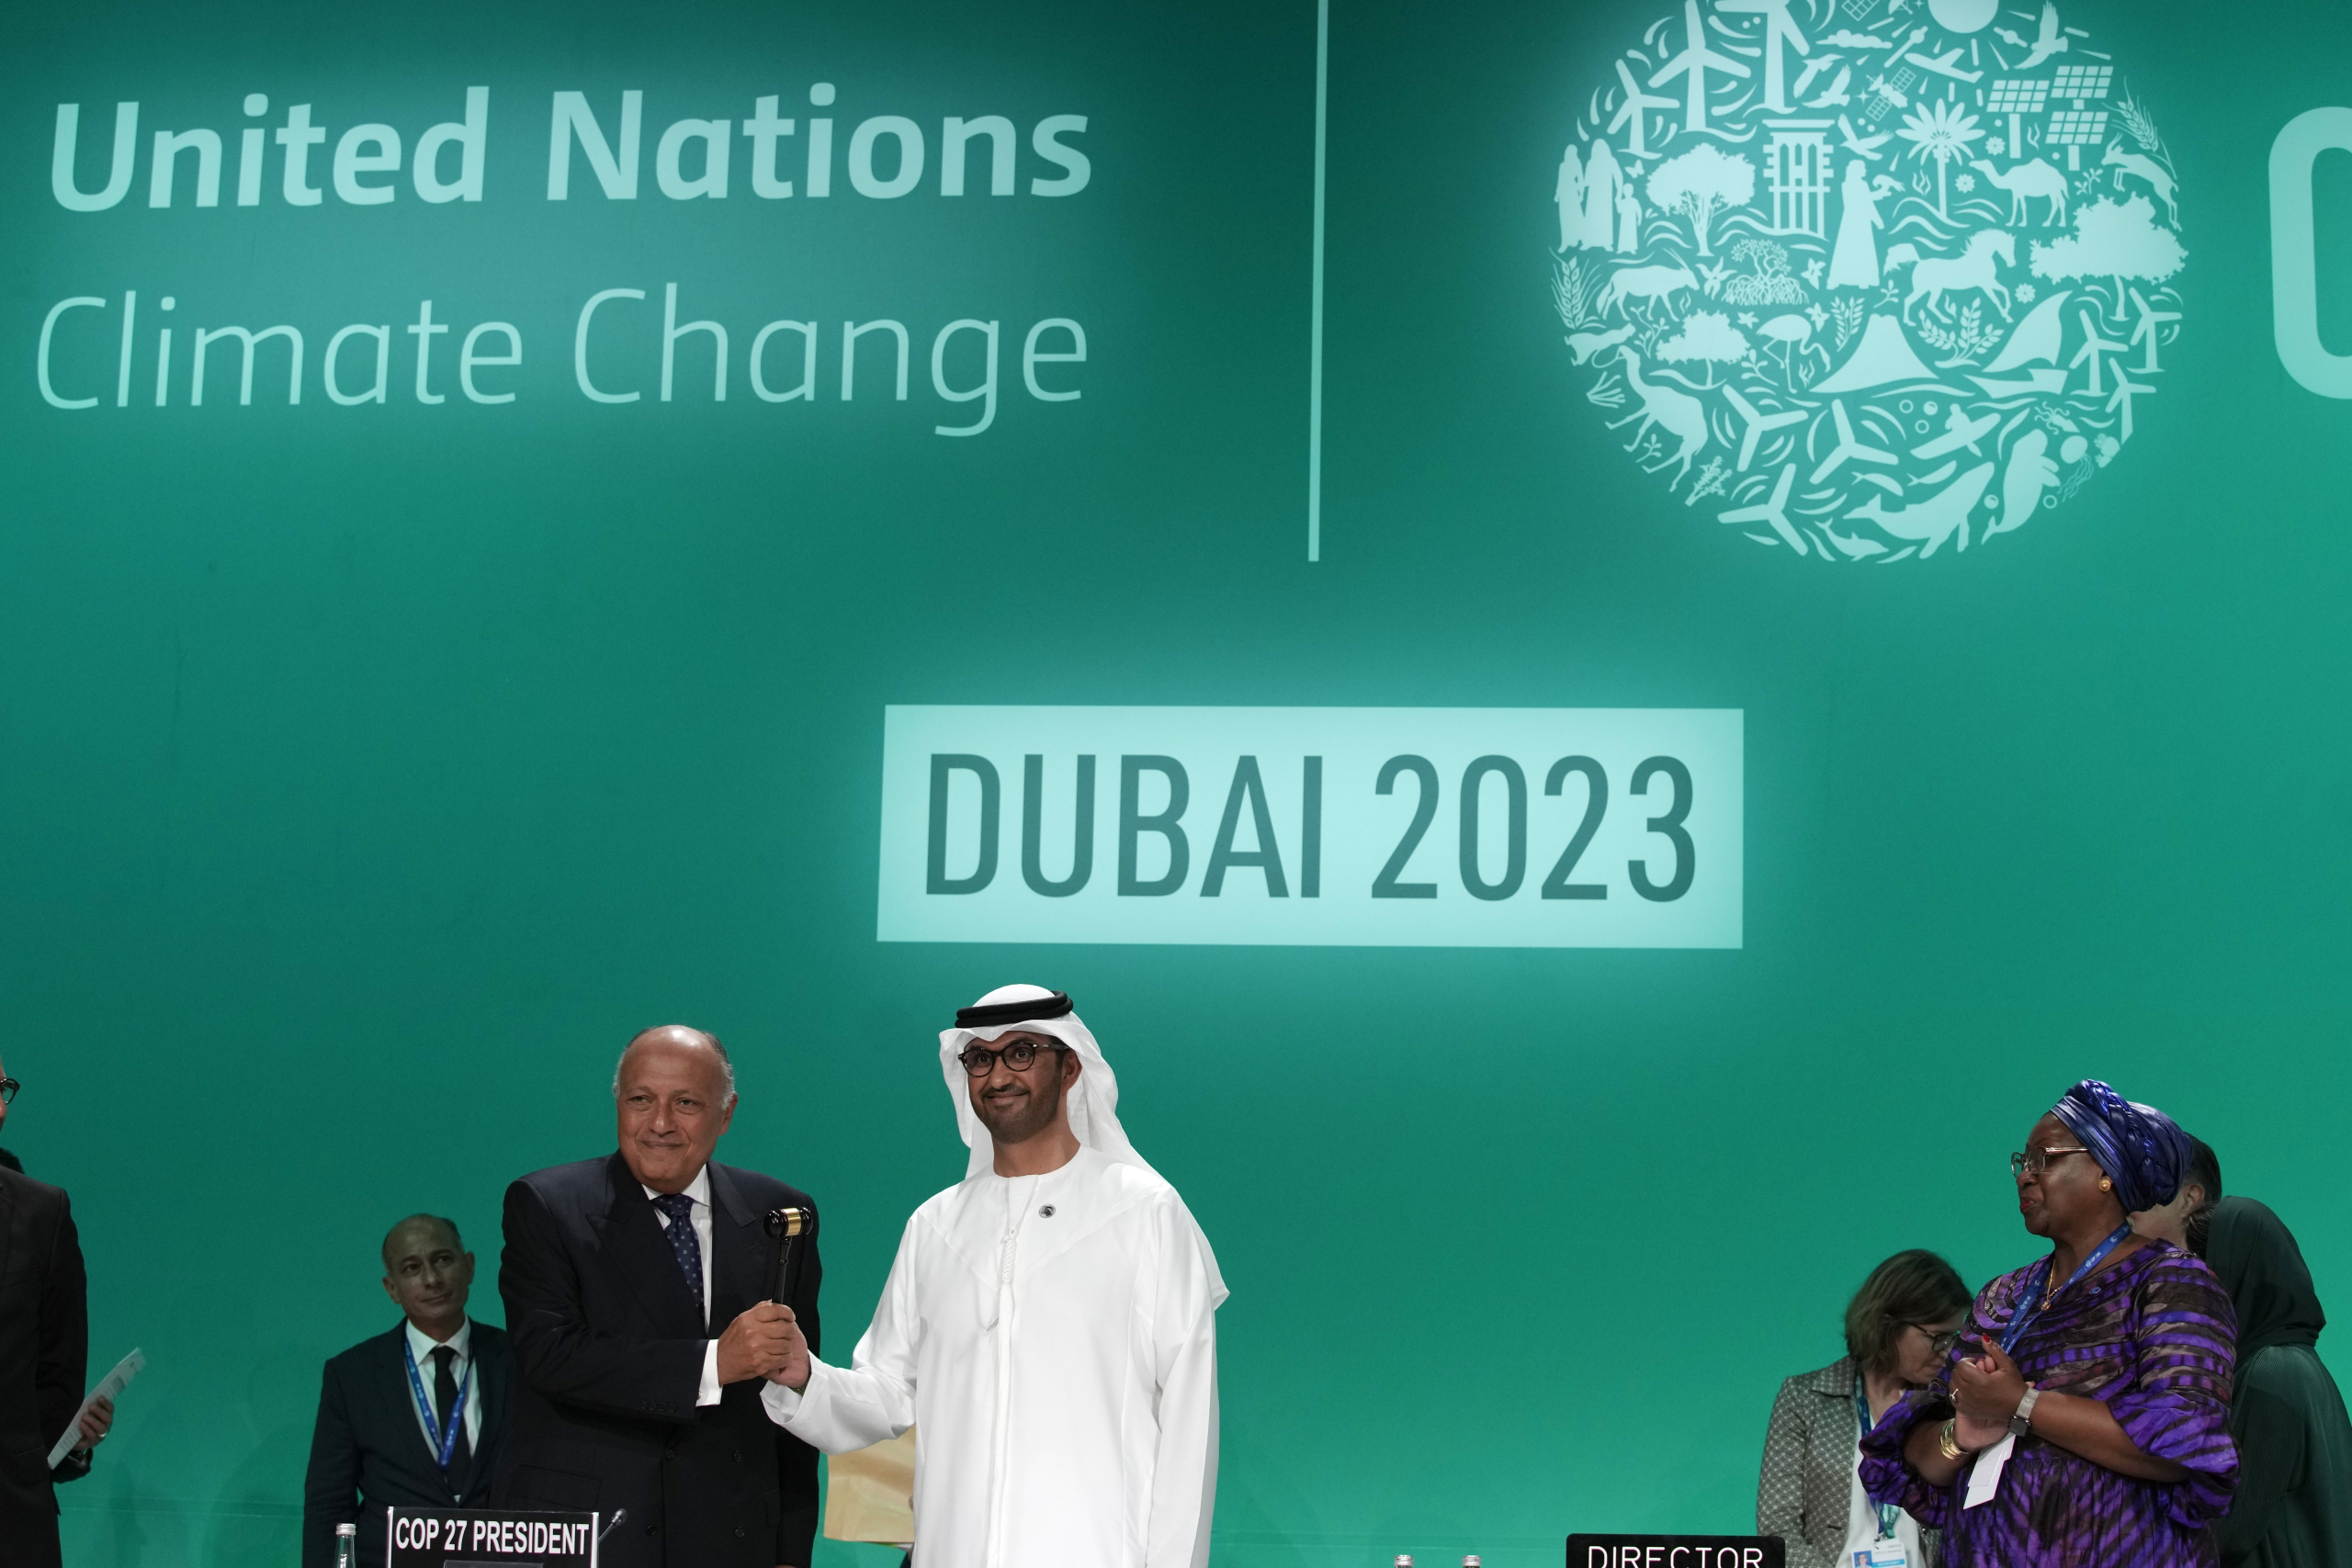 Sameh Shoukry, COP27 president, left, hands over the gavel to COP28 President Sultan al-Jaber, during the opening session at the COP28 U.N. Climate Summit, Thursday, Nov. 30, 2023, in Dubai, United Arab Emirates. (AP Photo/Peter Dejong)

Associated Press/LaPresse
Only Italy and Spain